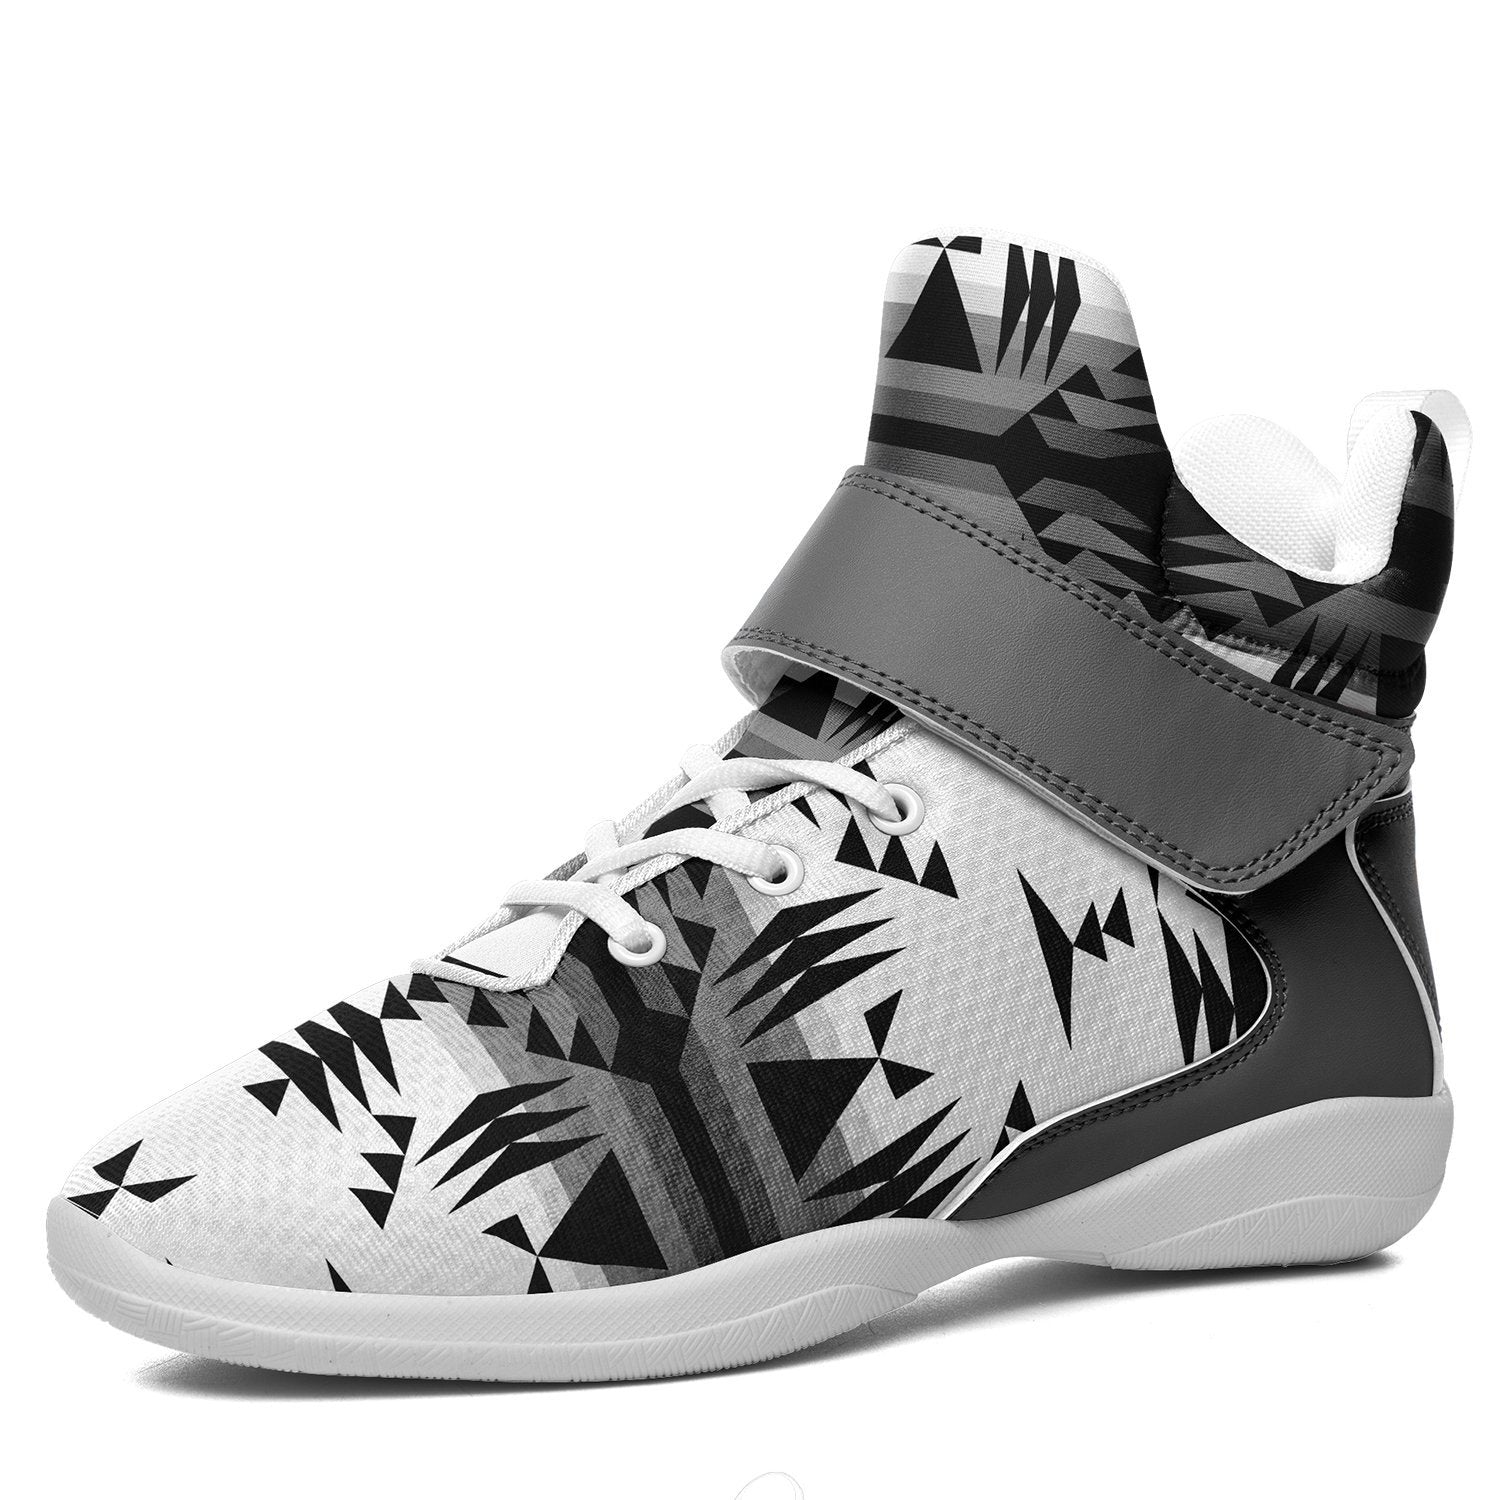 Between the Mountains White and Black Ipottaa Basketball / Sport High Top Shoes - White Sole 49 Dzine US Men 7 / EUR 40 White Sole with Gray Strap 